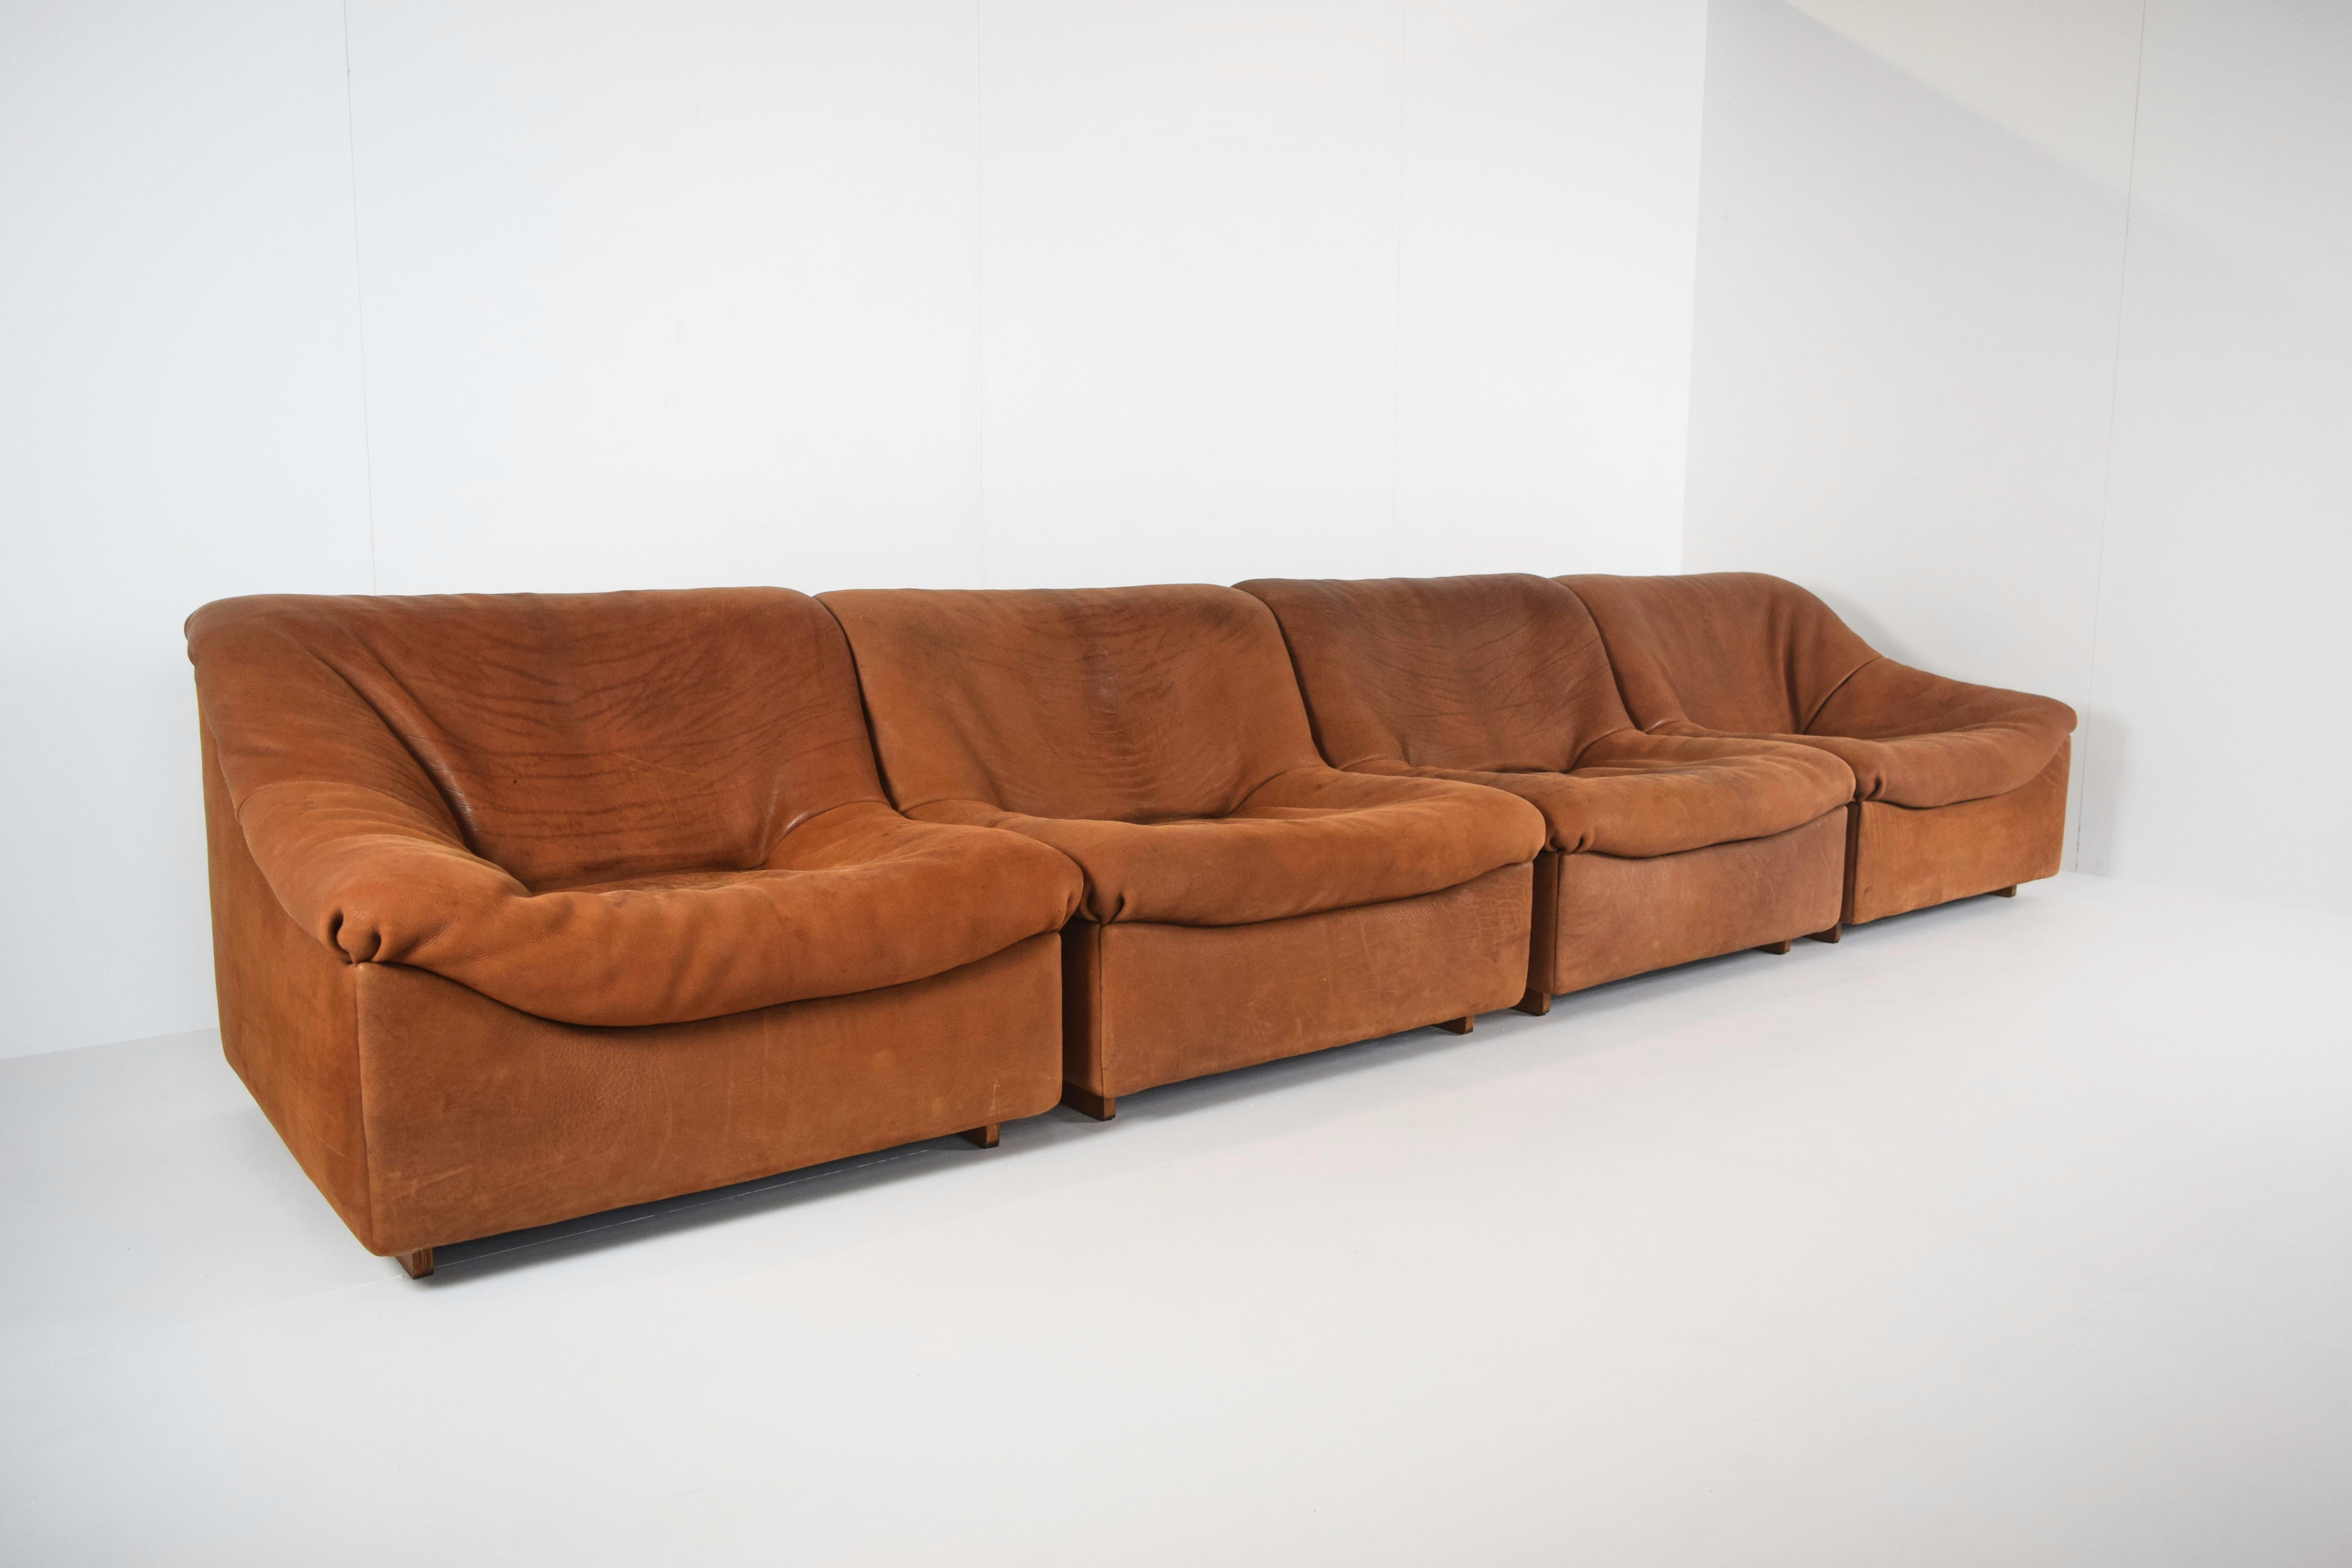 Impressive four-seat De Sede DS46 in cognac color neck leather. The four elements can be situated as one large sofa or in a 3-1 or 2-2 set-up. It clearly has a left and a right element. In total the sofa can be close to 4 meters width. This sofa